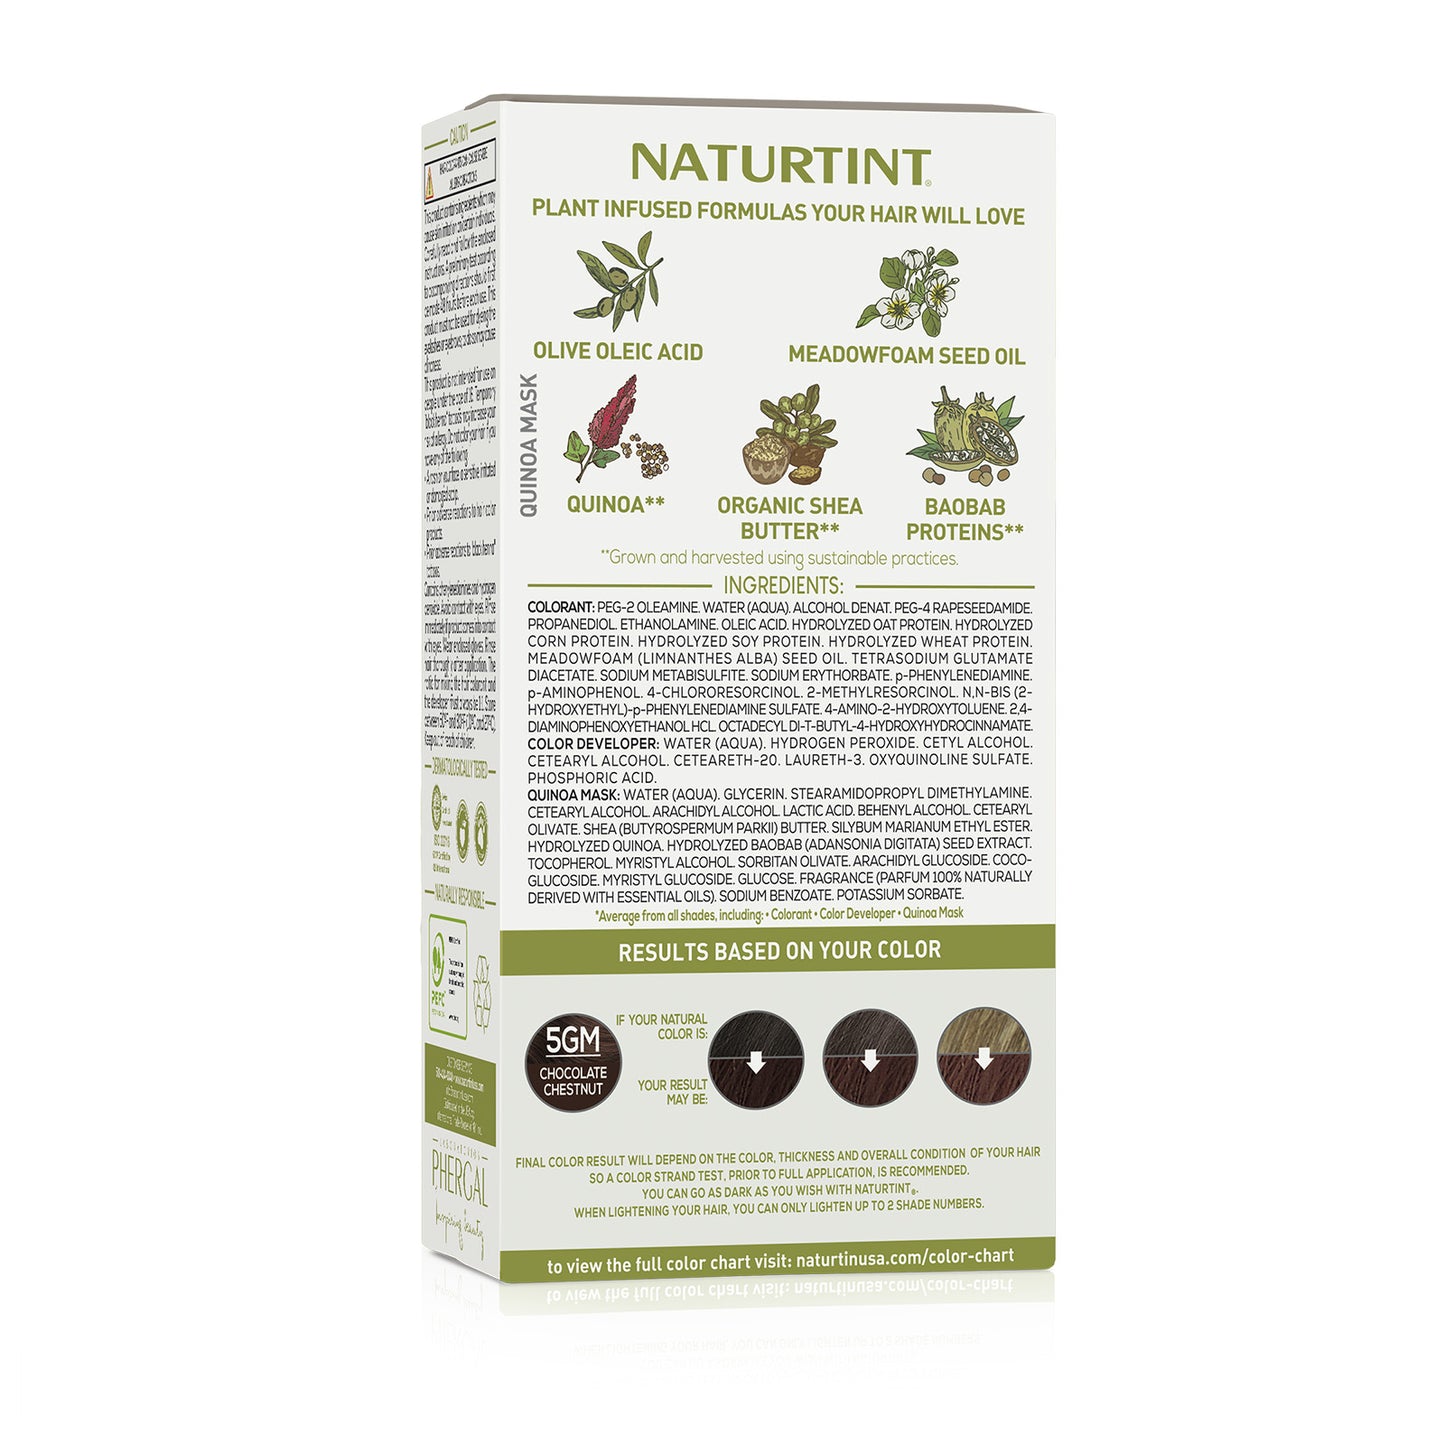 Naturtint Permanent Hair Color 5GM Chocolate Chestnut (Packaging may vary)